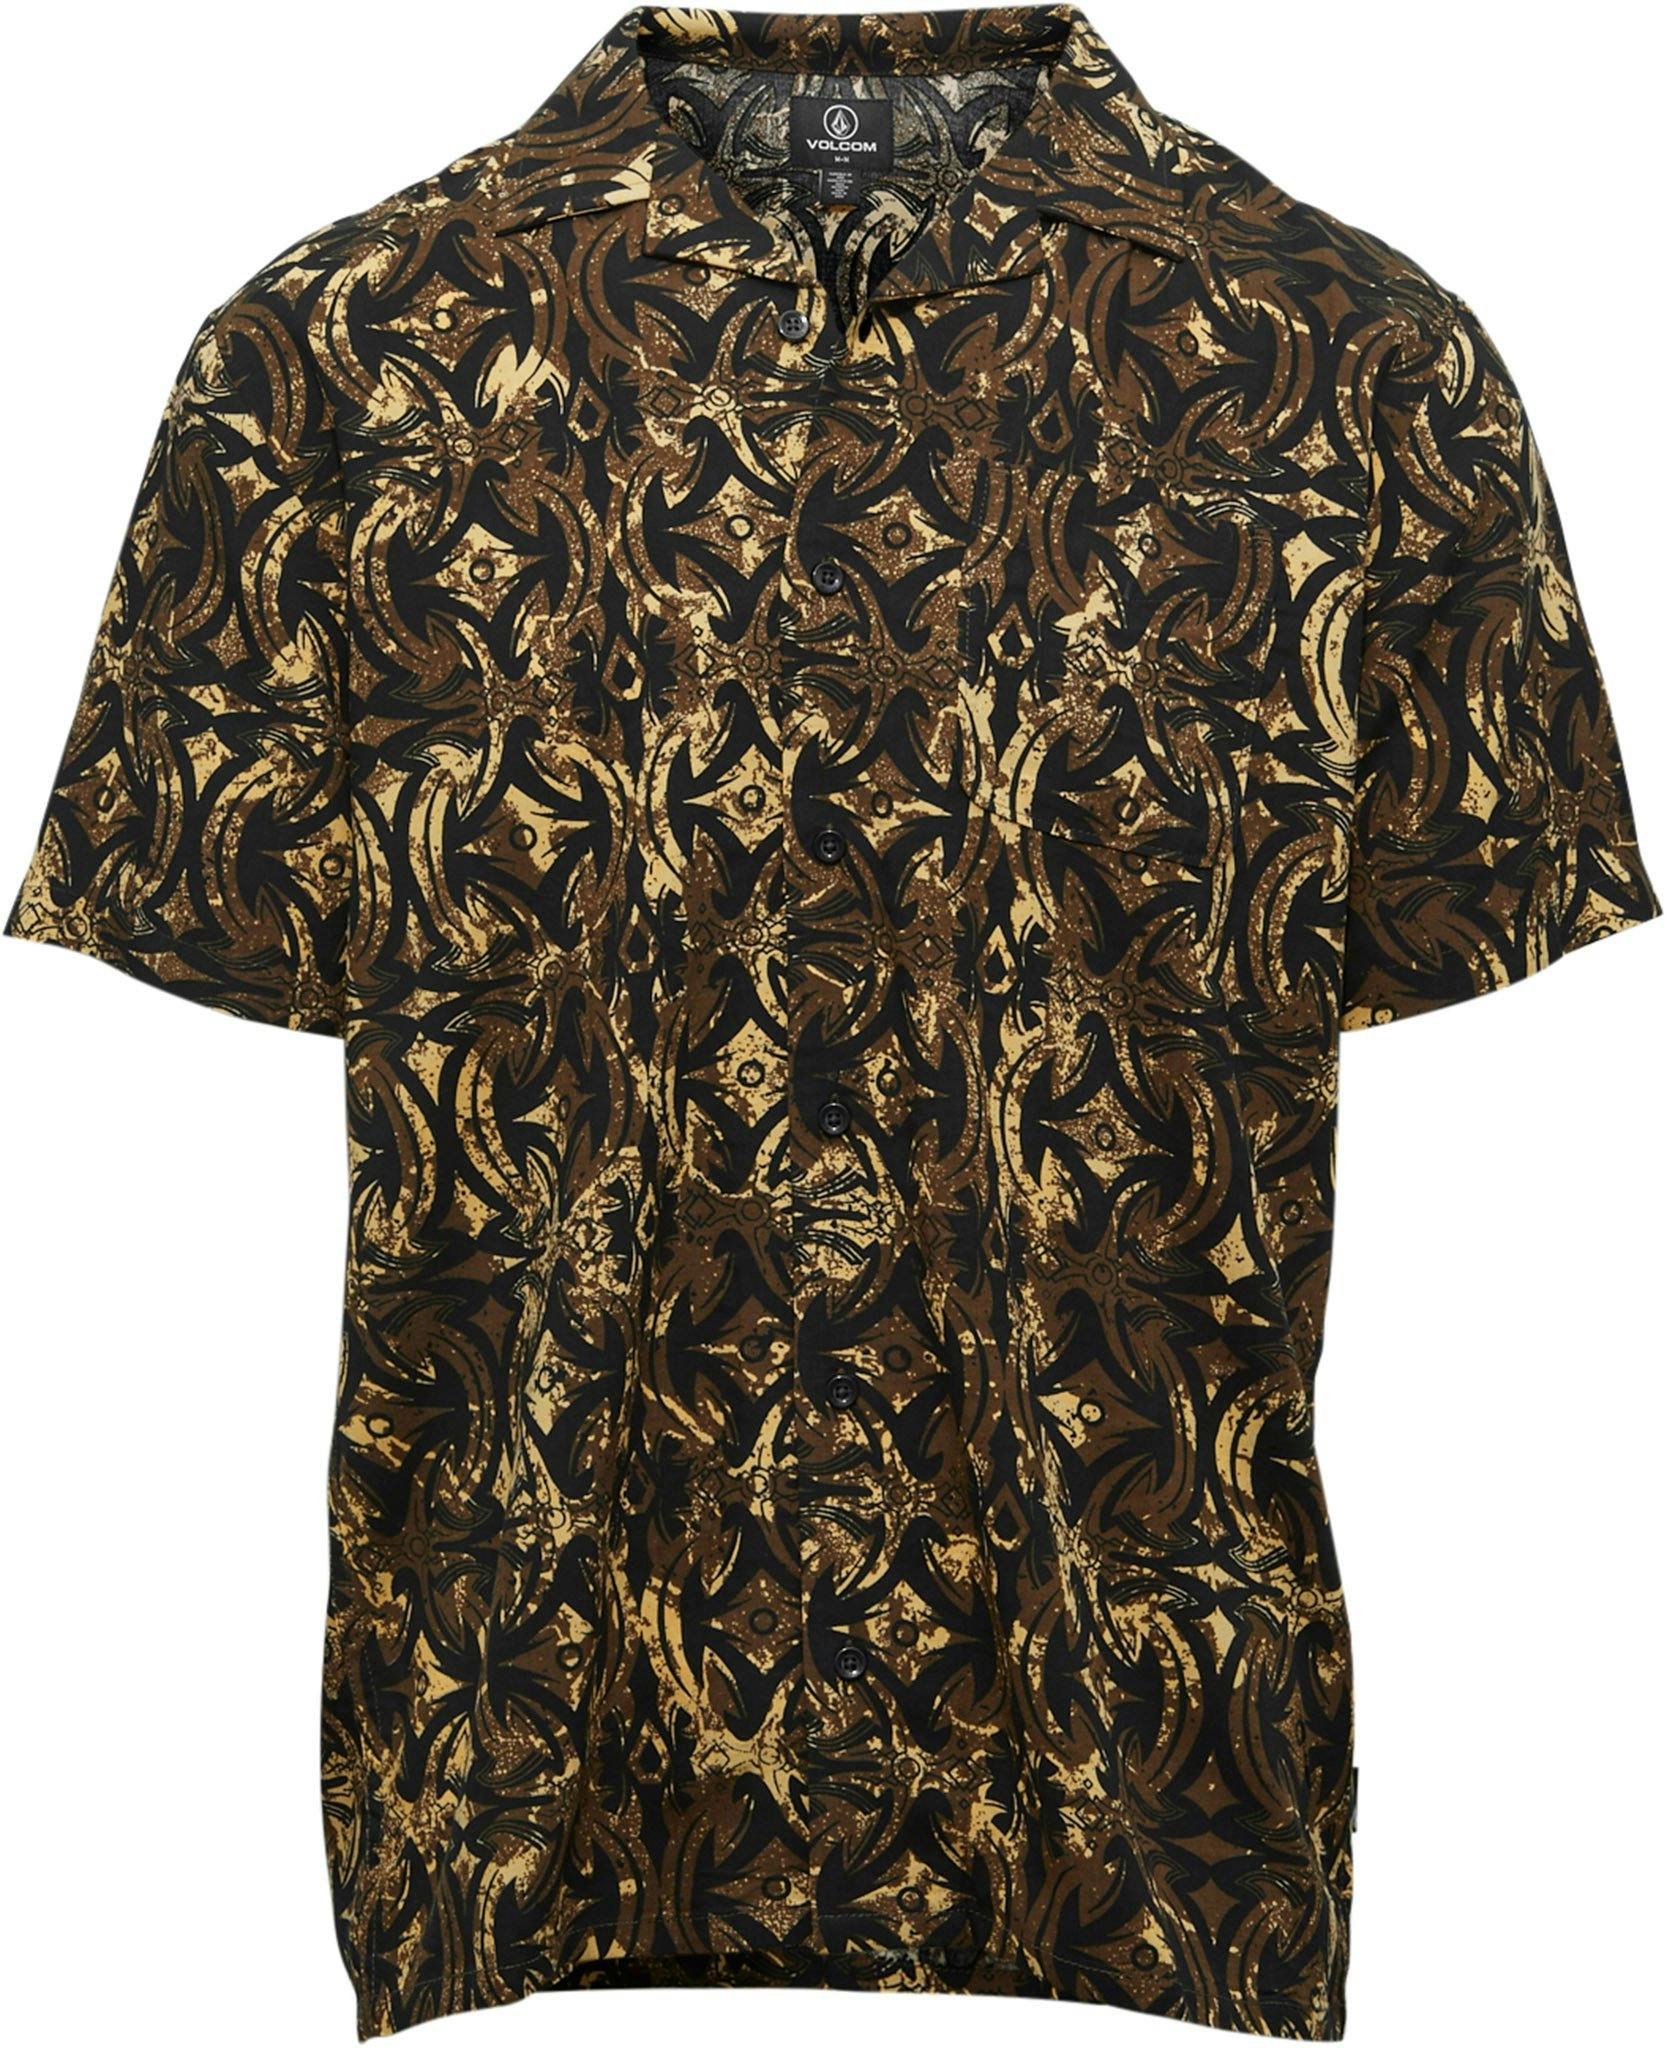 Product image for Bold Moves Short Sleeve Shirt - Men's